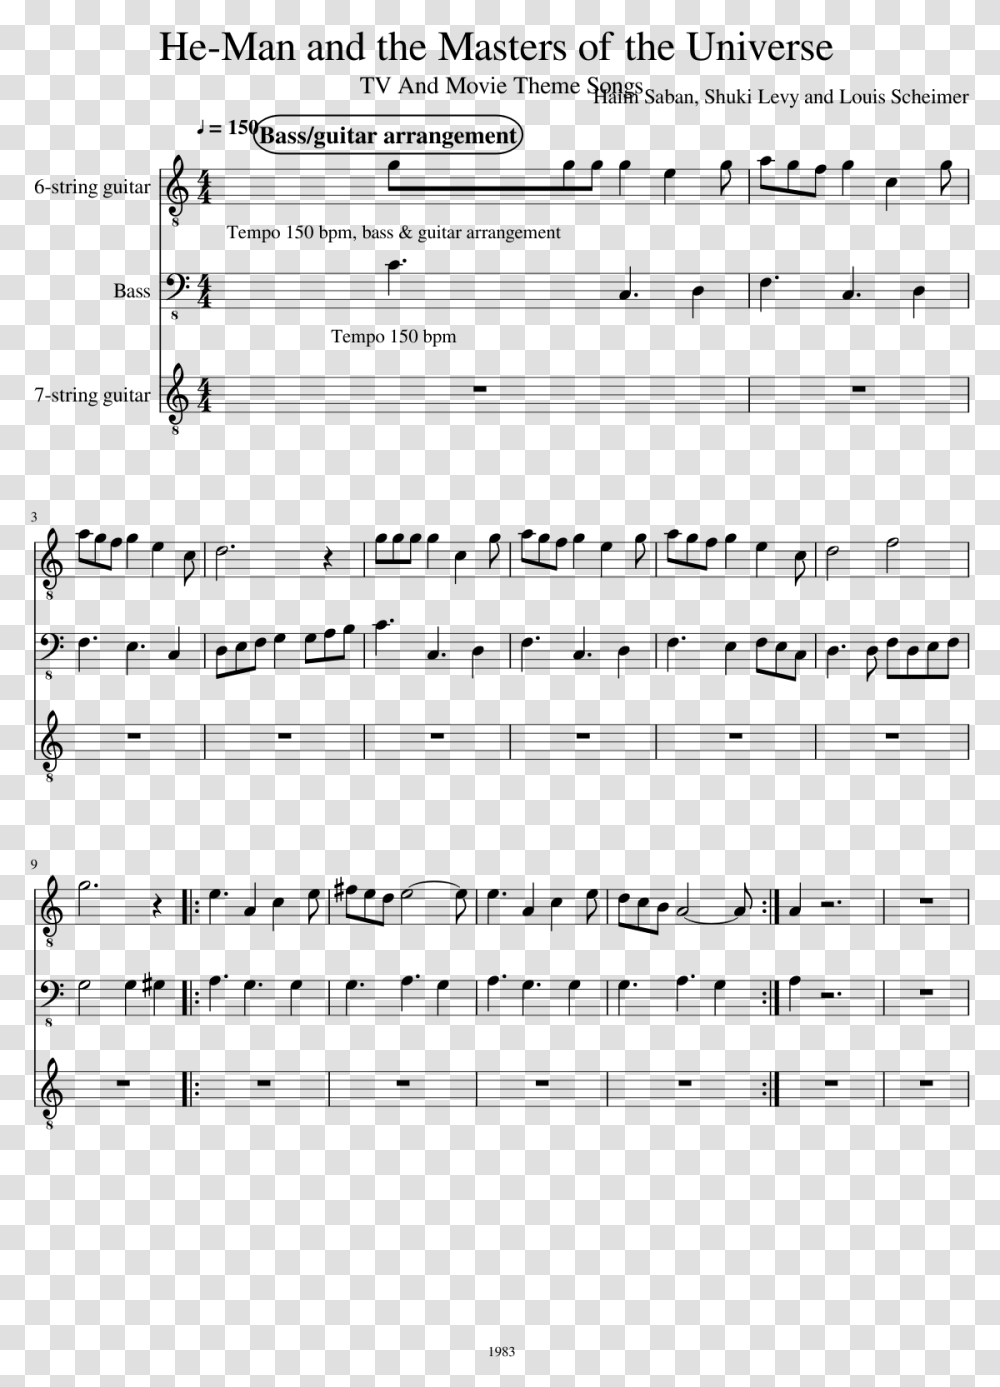 He Man And The Masters Of The Universe Slide Image He Man Sheet Music, Gray Transparent Png